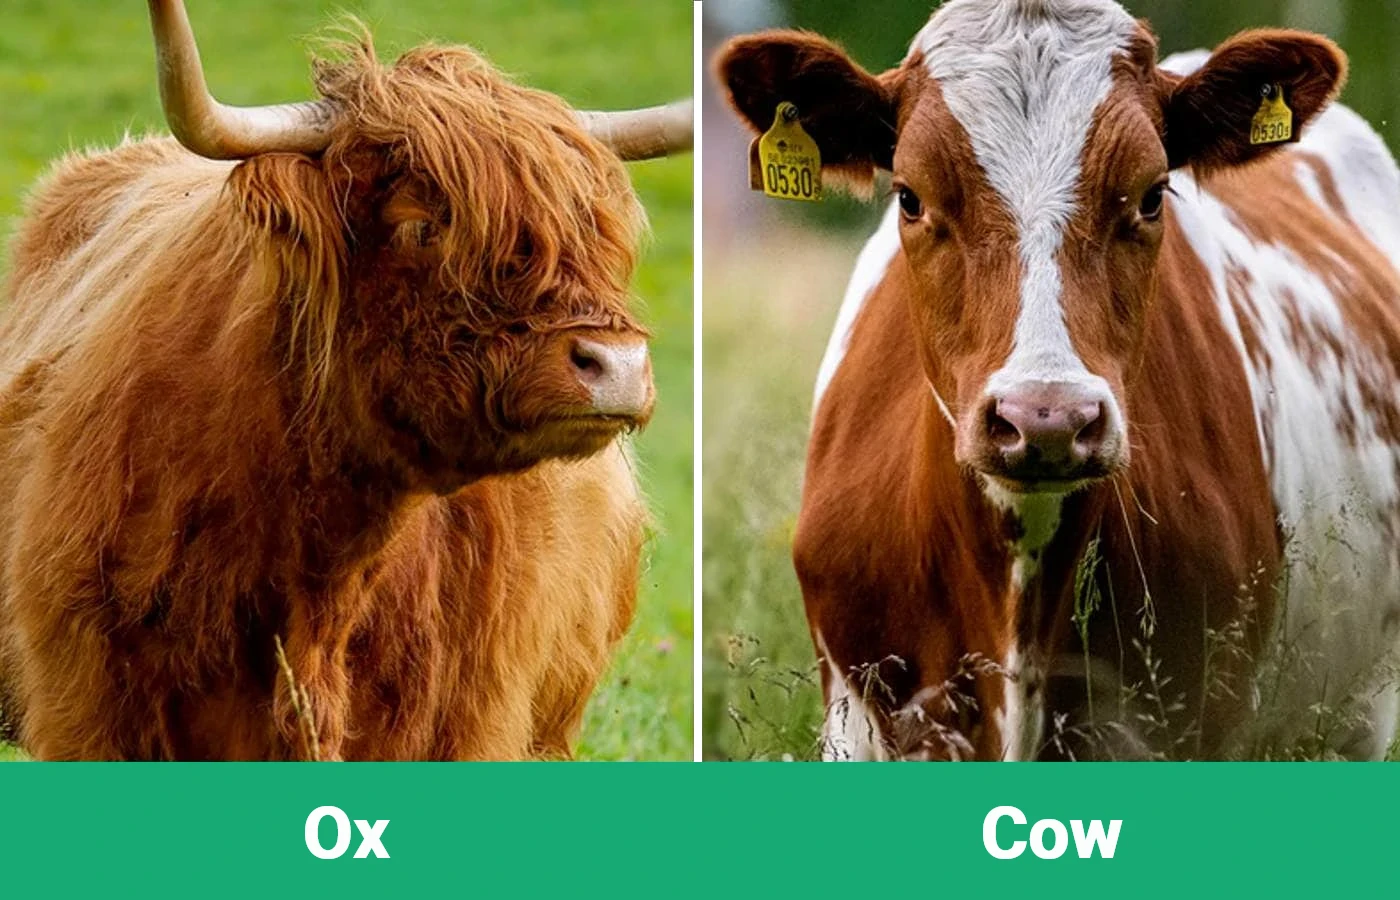 Ox vs Cow - Visual Differences